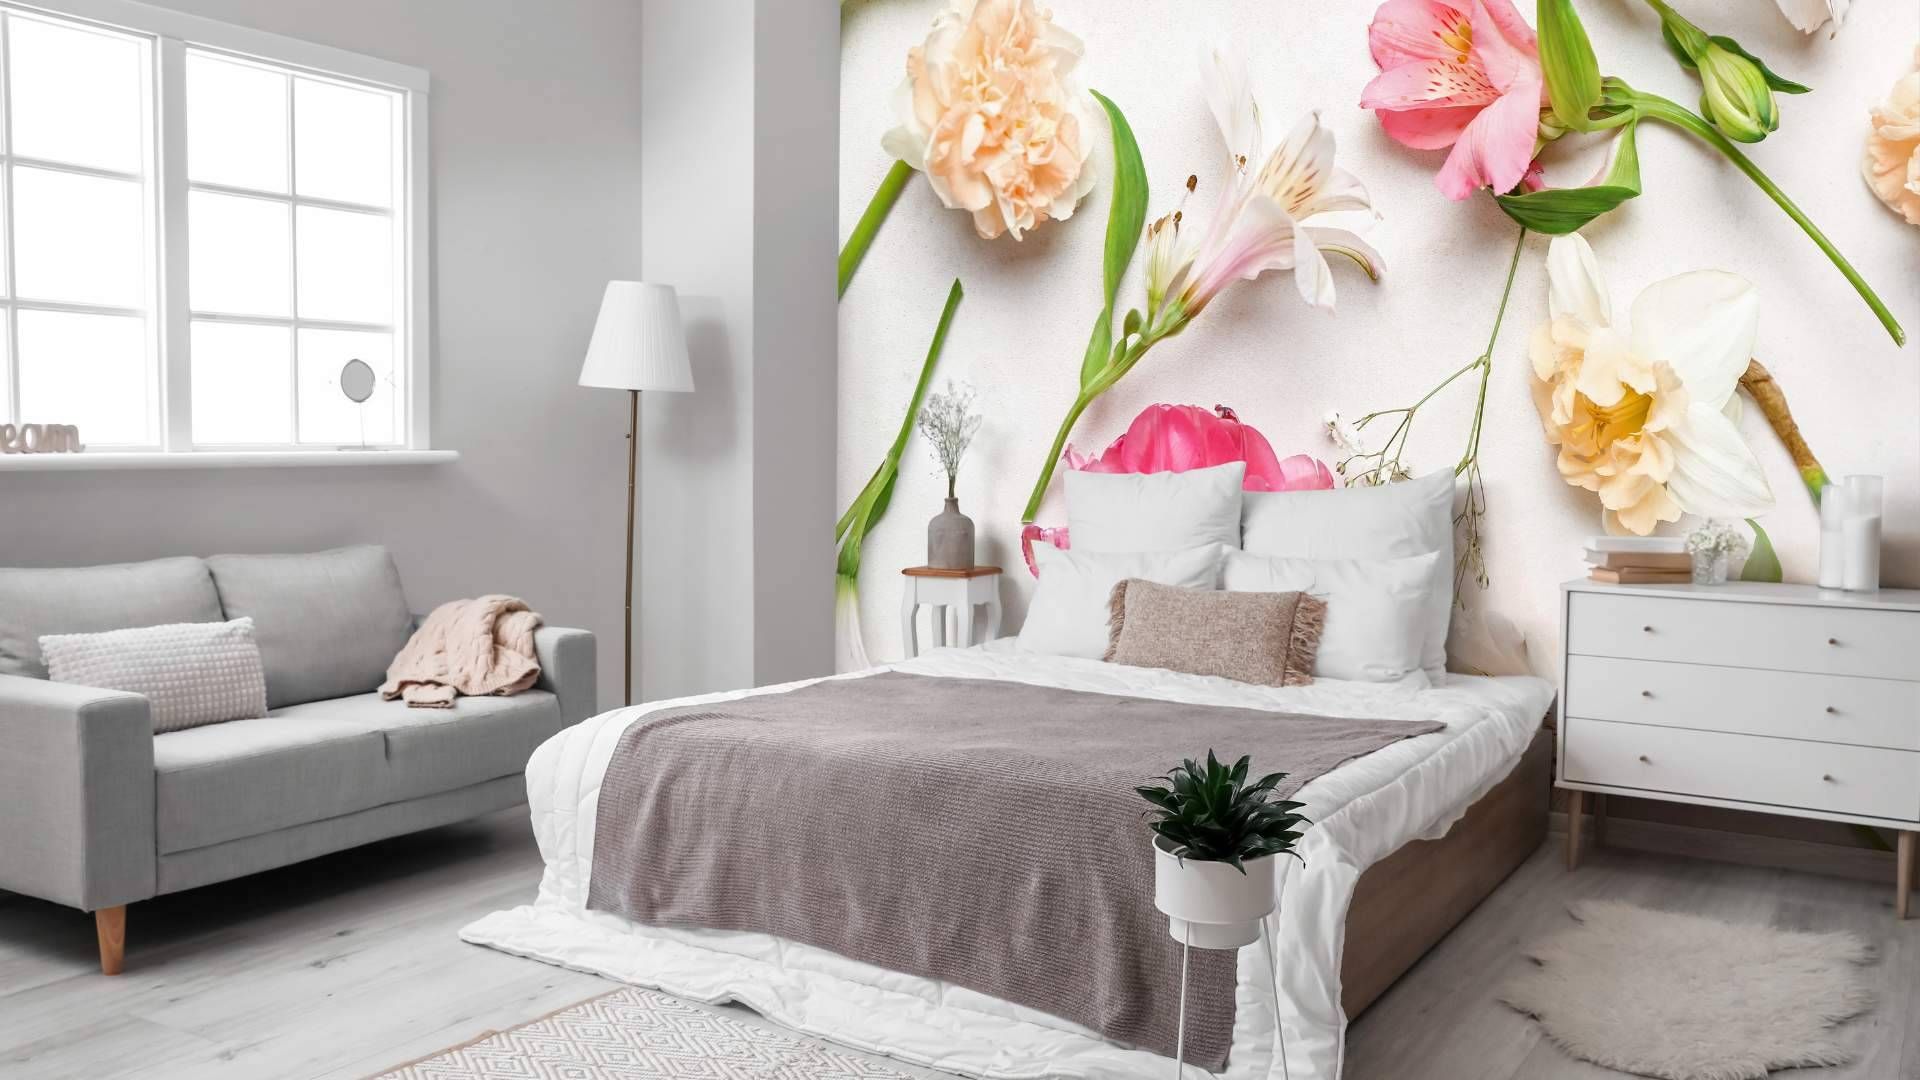 Flower power: bloomcore is home décor’s latest trend